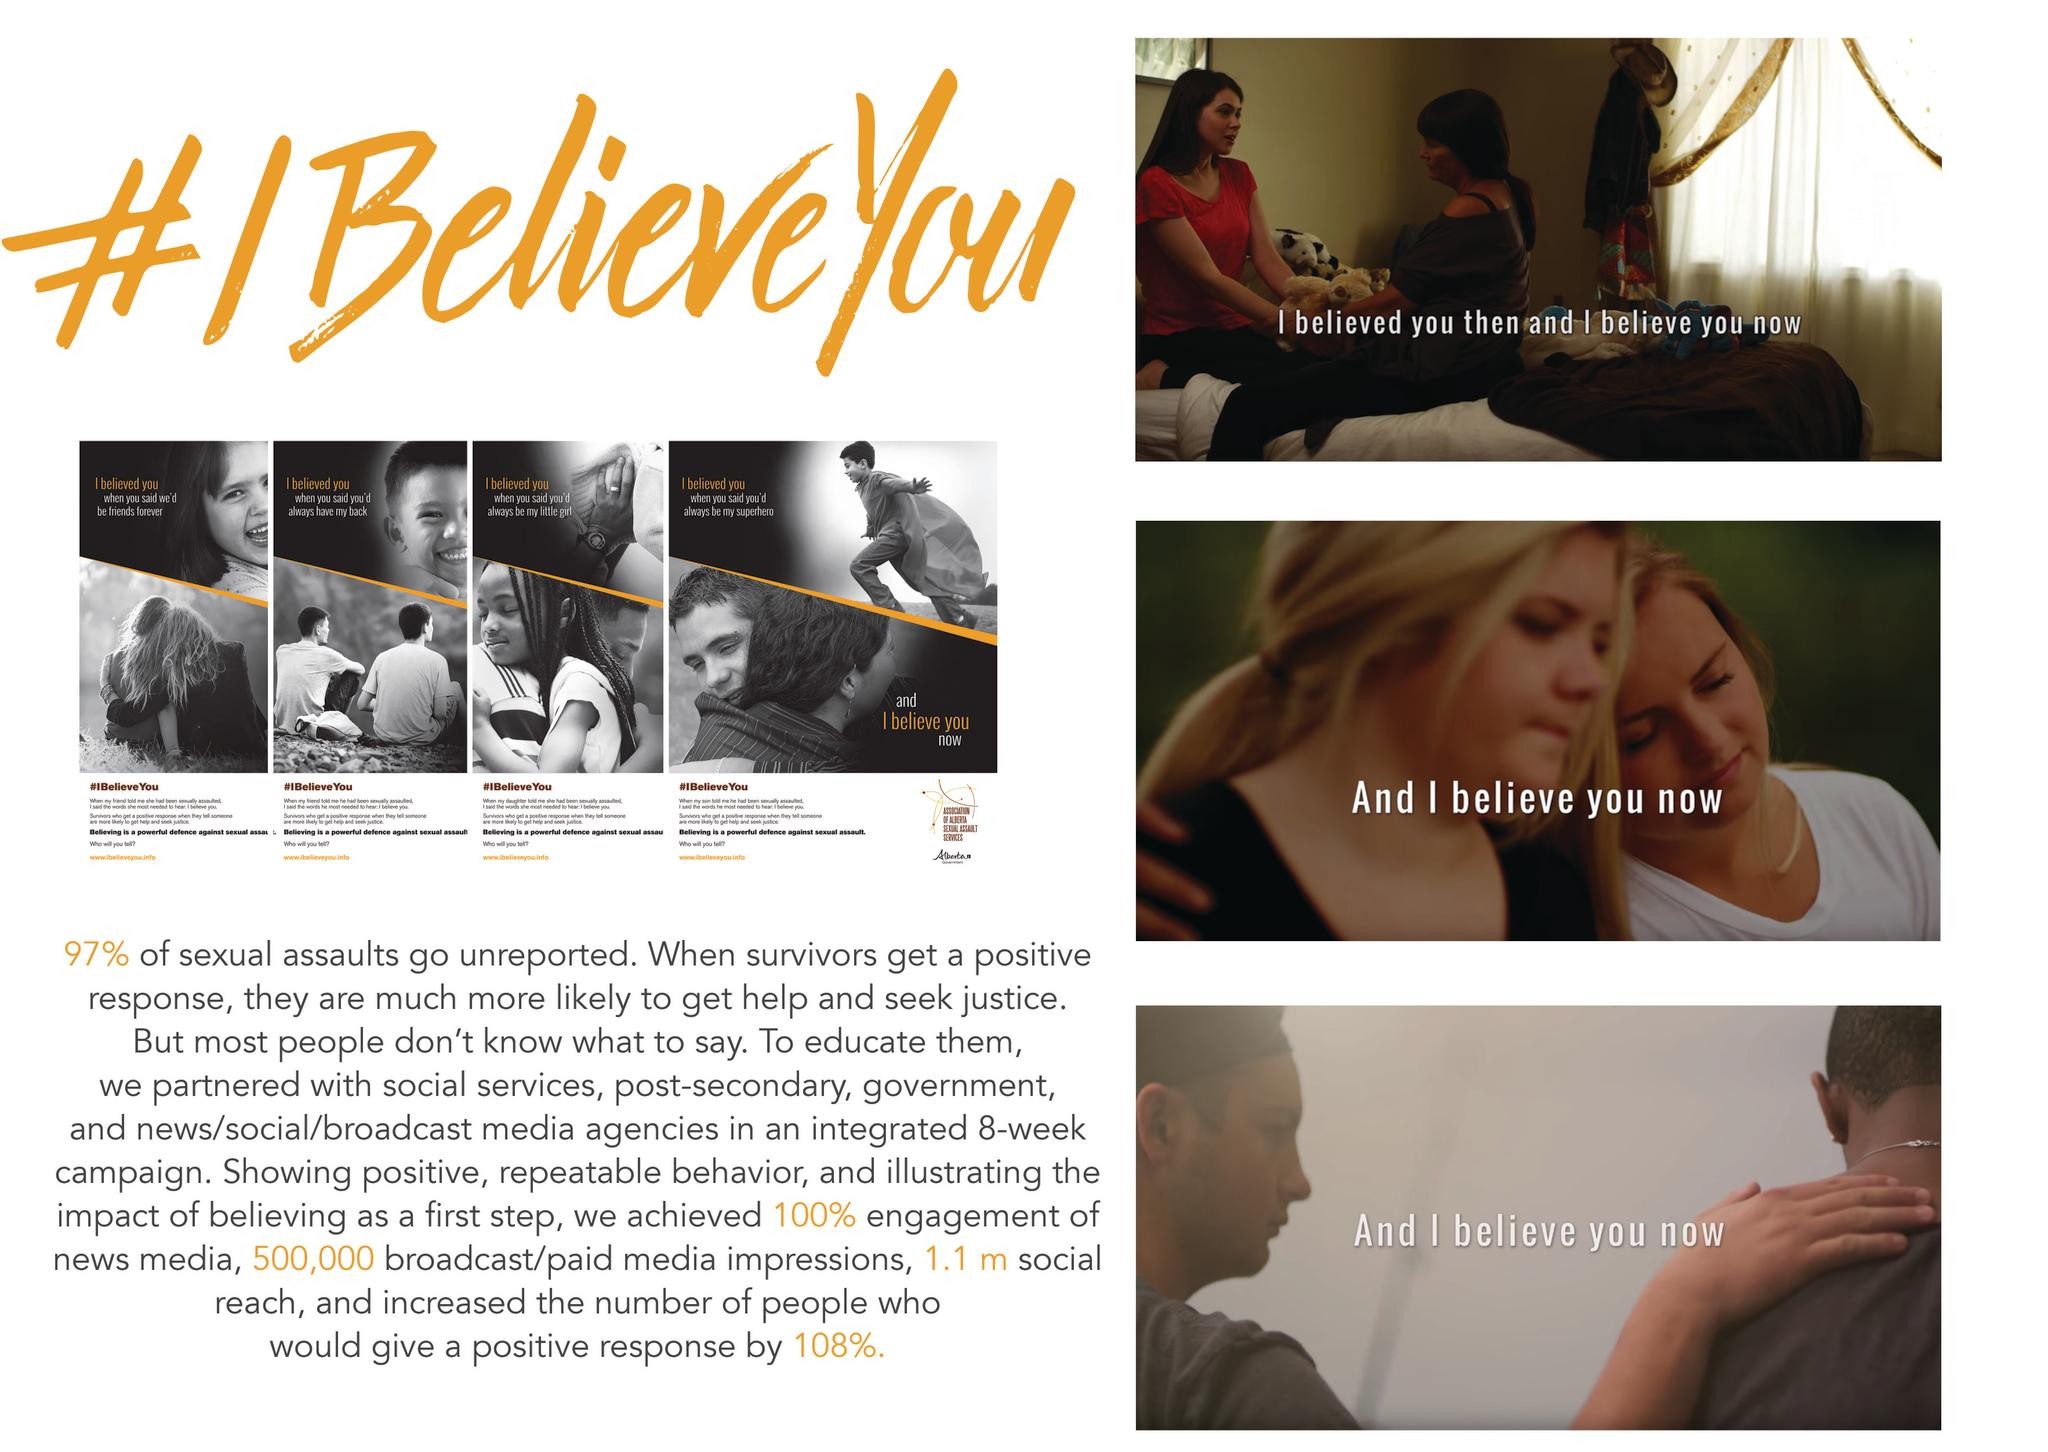 #IBelieveYou--a campaign to promote a consistently positive response to sexual a